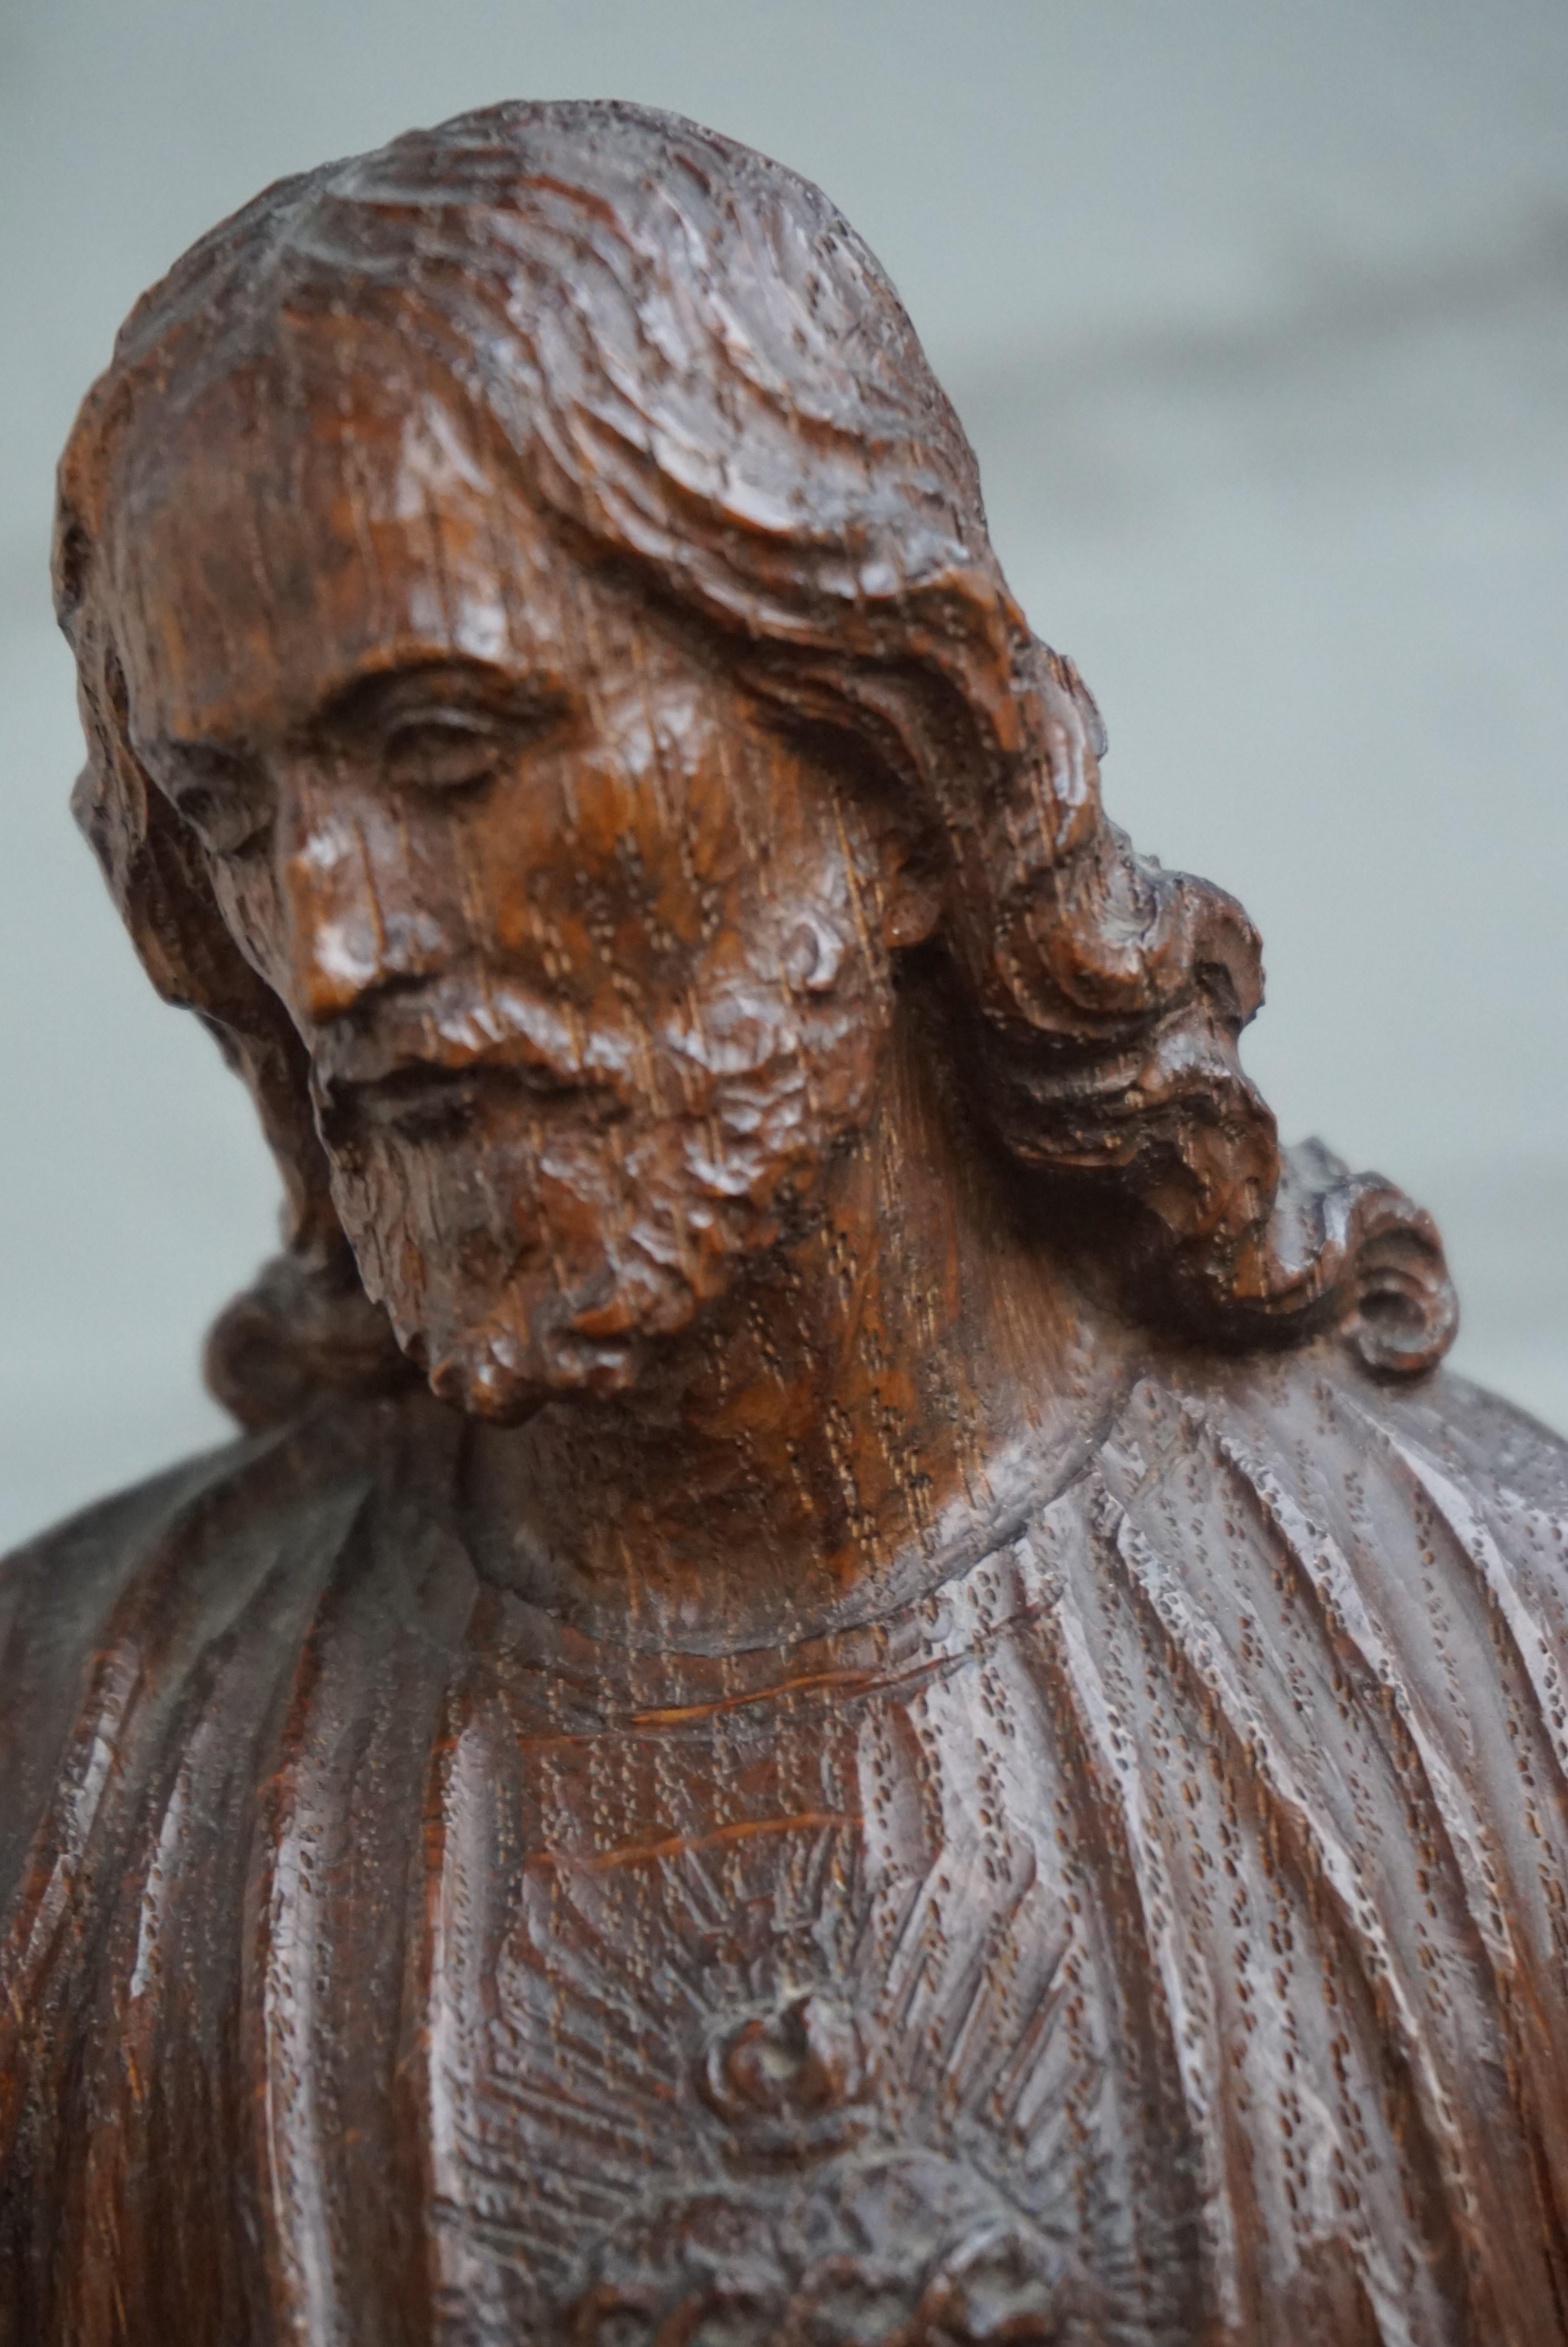 Arts and Crafts Antique and Hand Carved Sculpture of Our Lord & Teacher Jesus by Bruno Gerrits